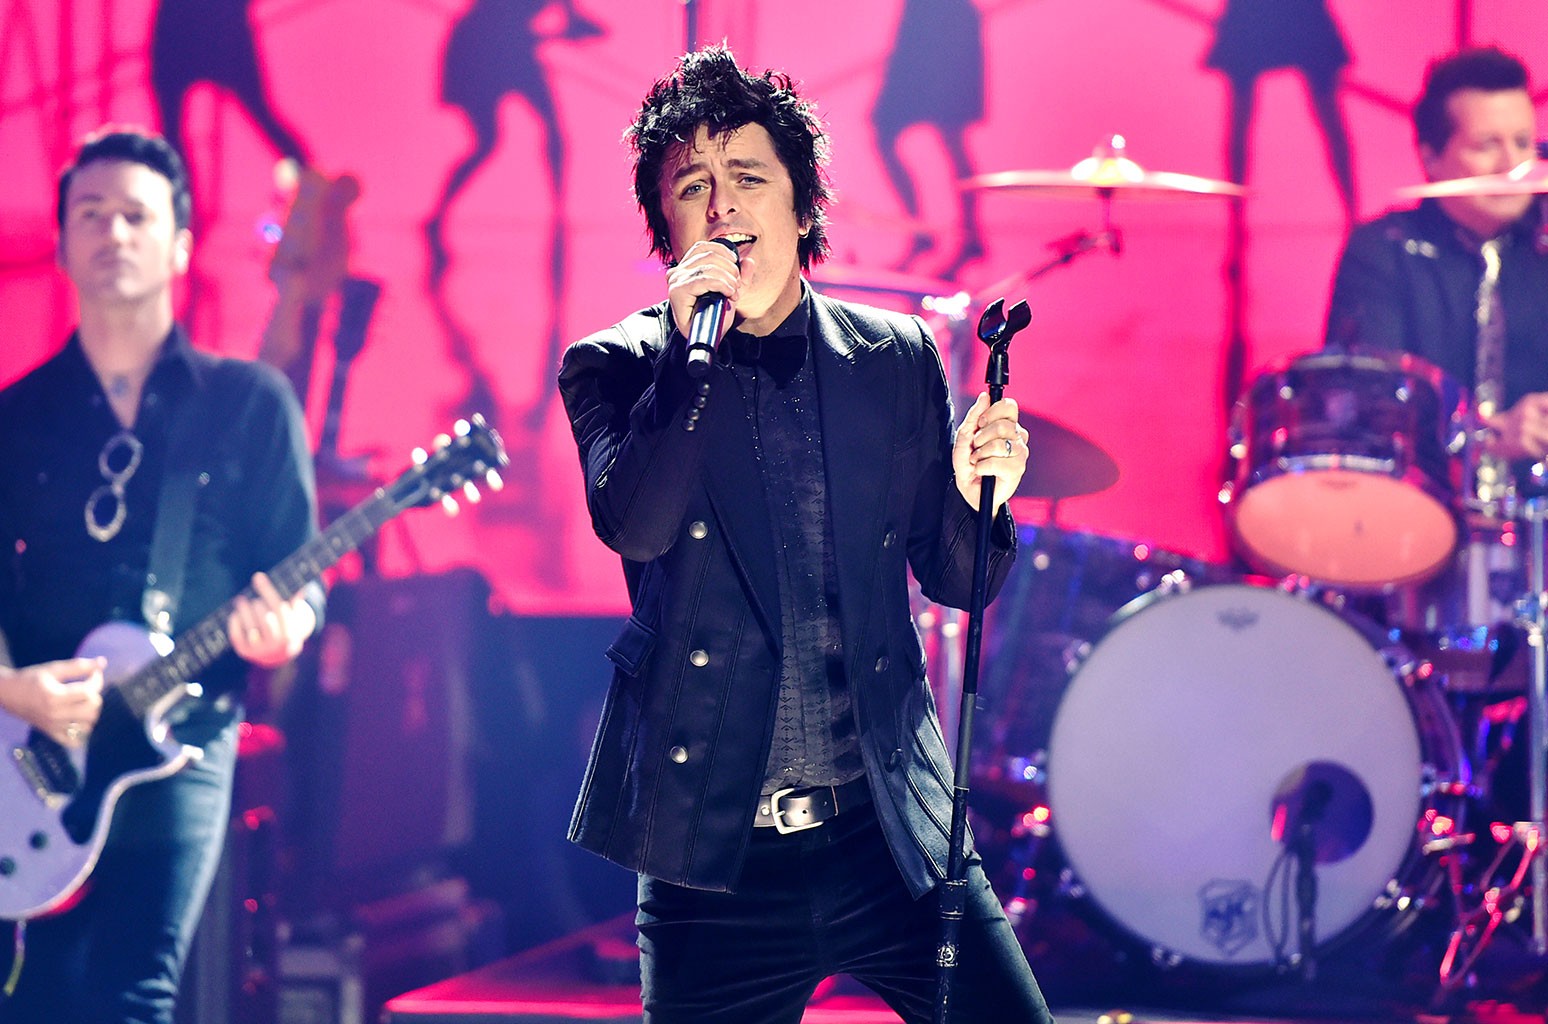 Green Day's Billie Joe Armstrong Covers 'I Think We're Alone Now